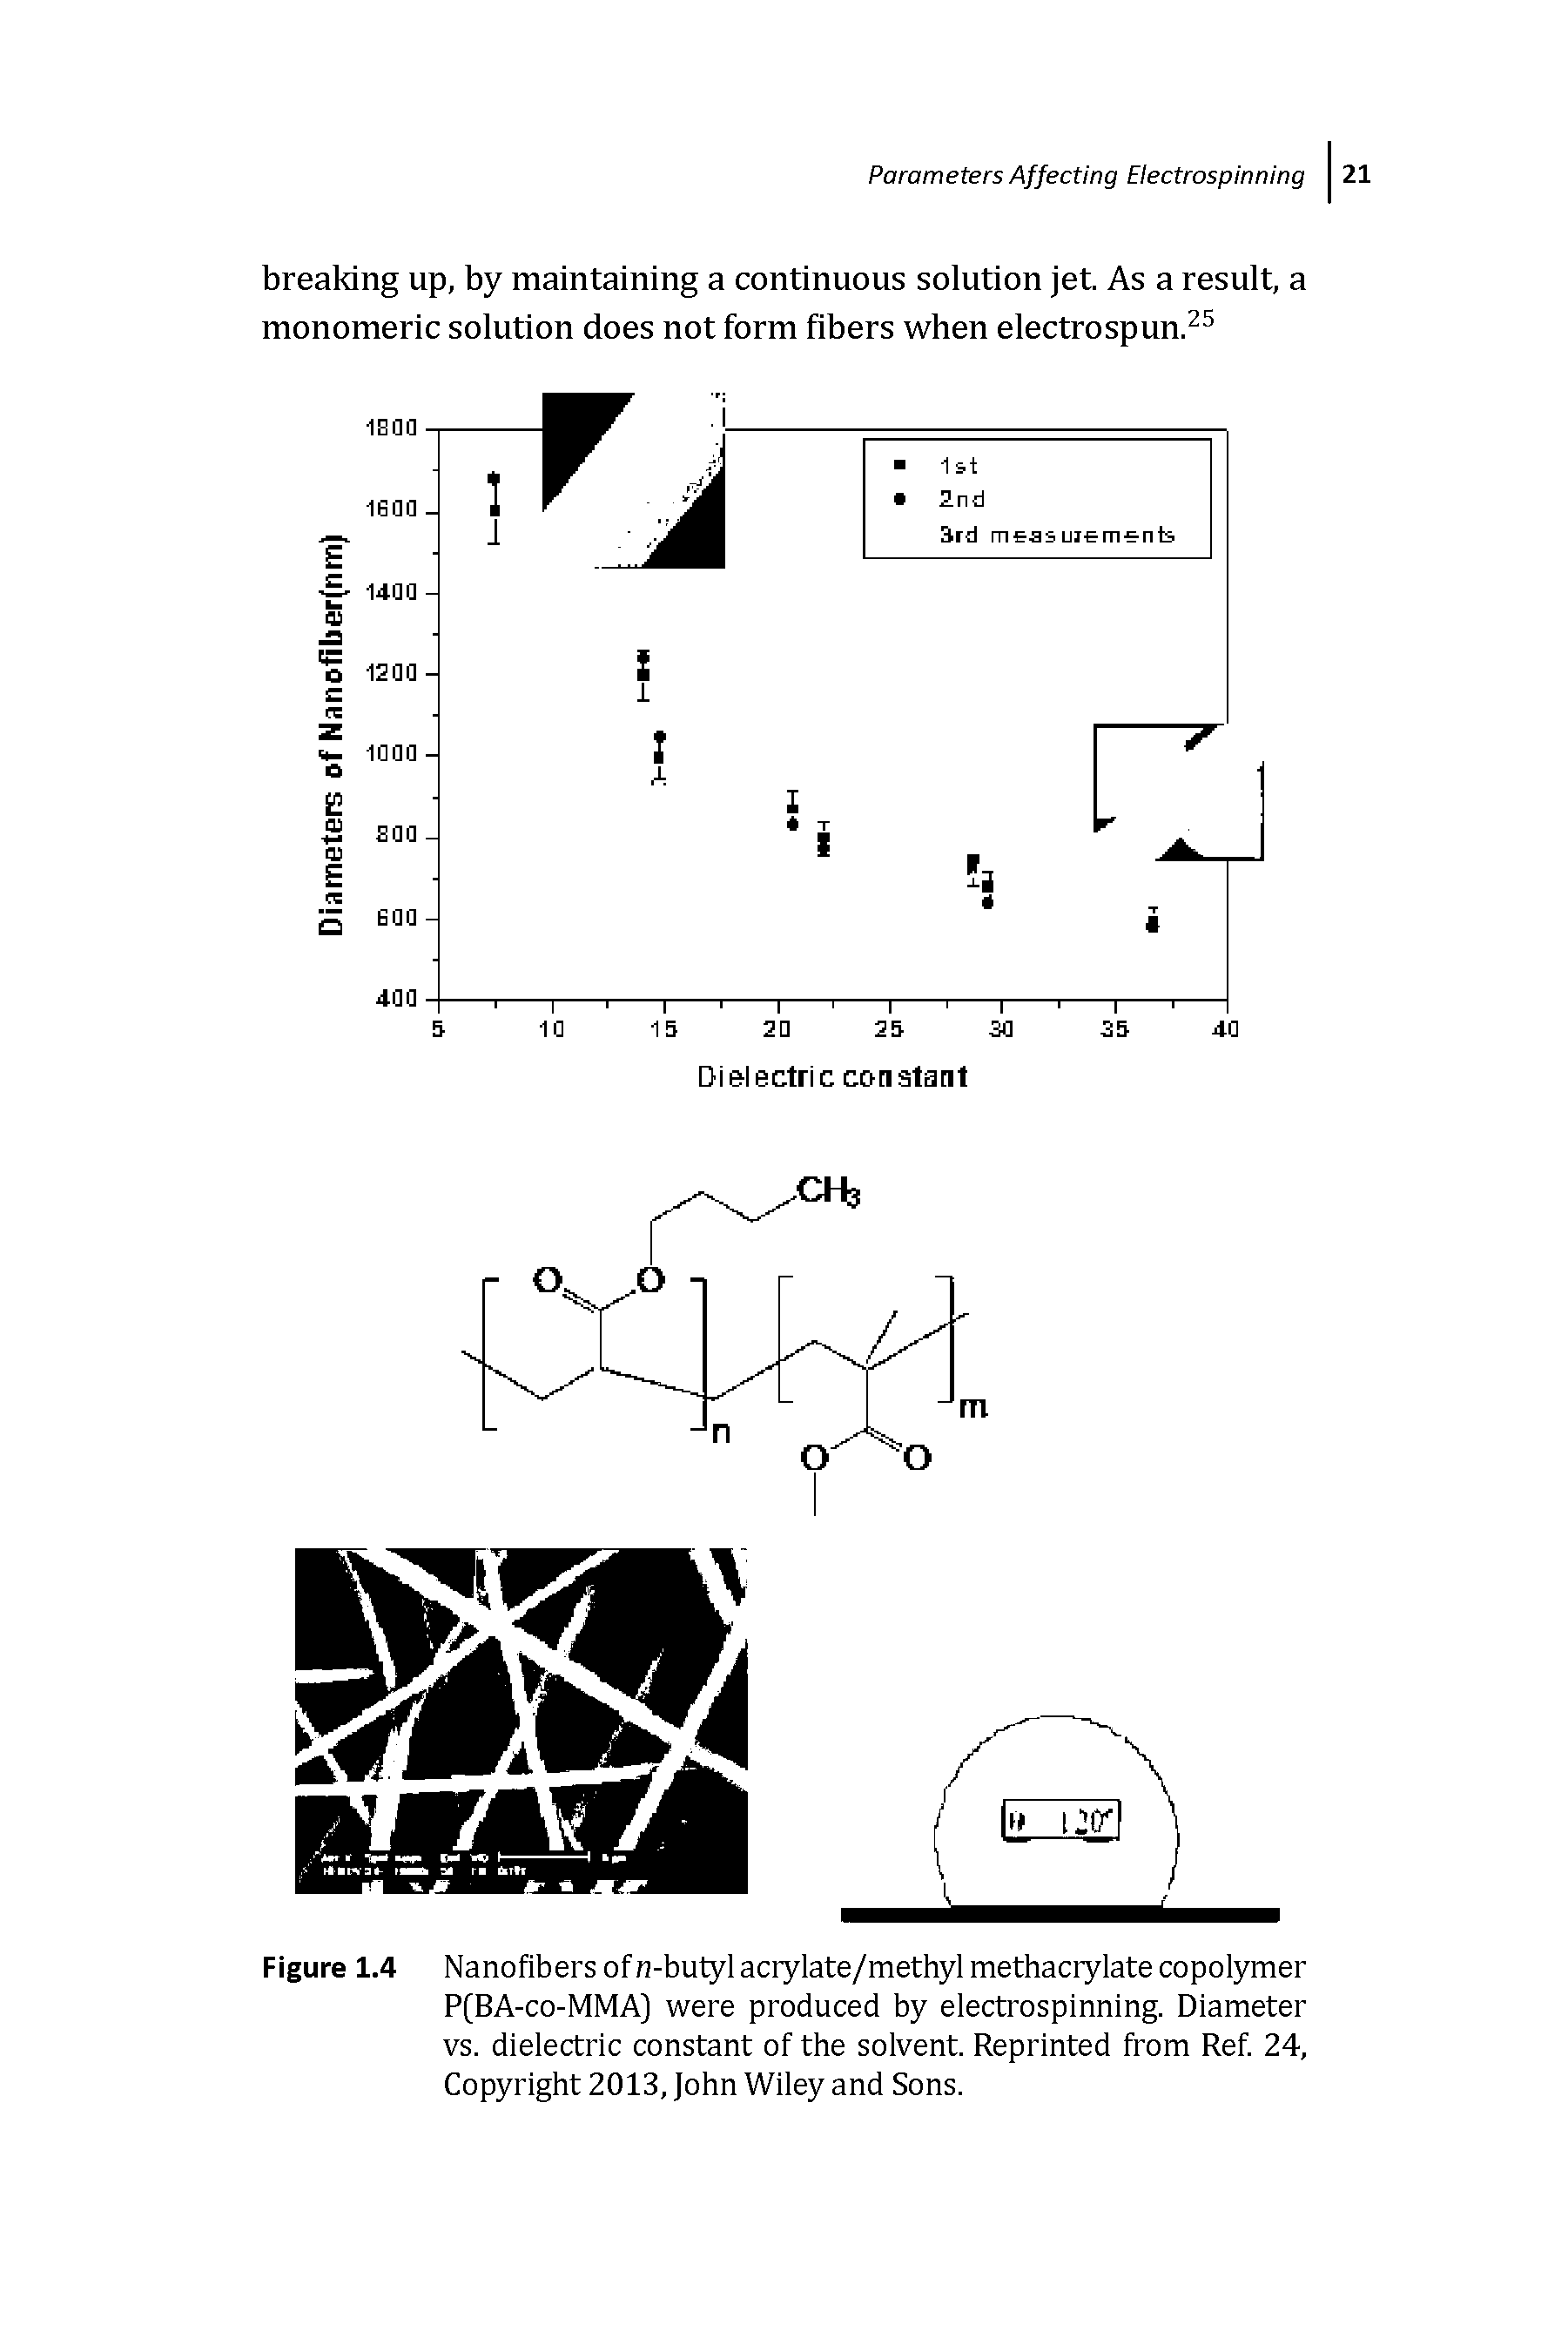 Figure 1.4 Nanofibers of n-butyl acrylate/methyl methacrylate copolymer P[BA-co-MMA] were produced by electrospinning. Diameter vs. dielectric constant of the solvent. Reprinted from Ref. 24, Copyright 2013, John Wiley and Sons.